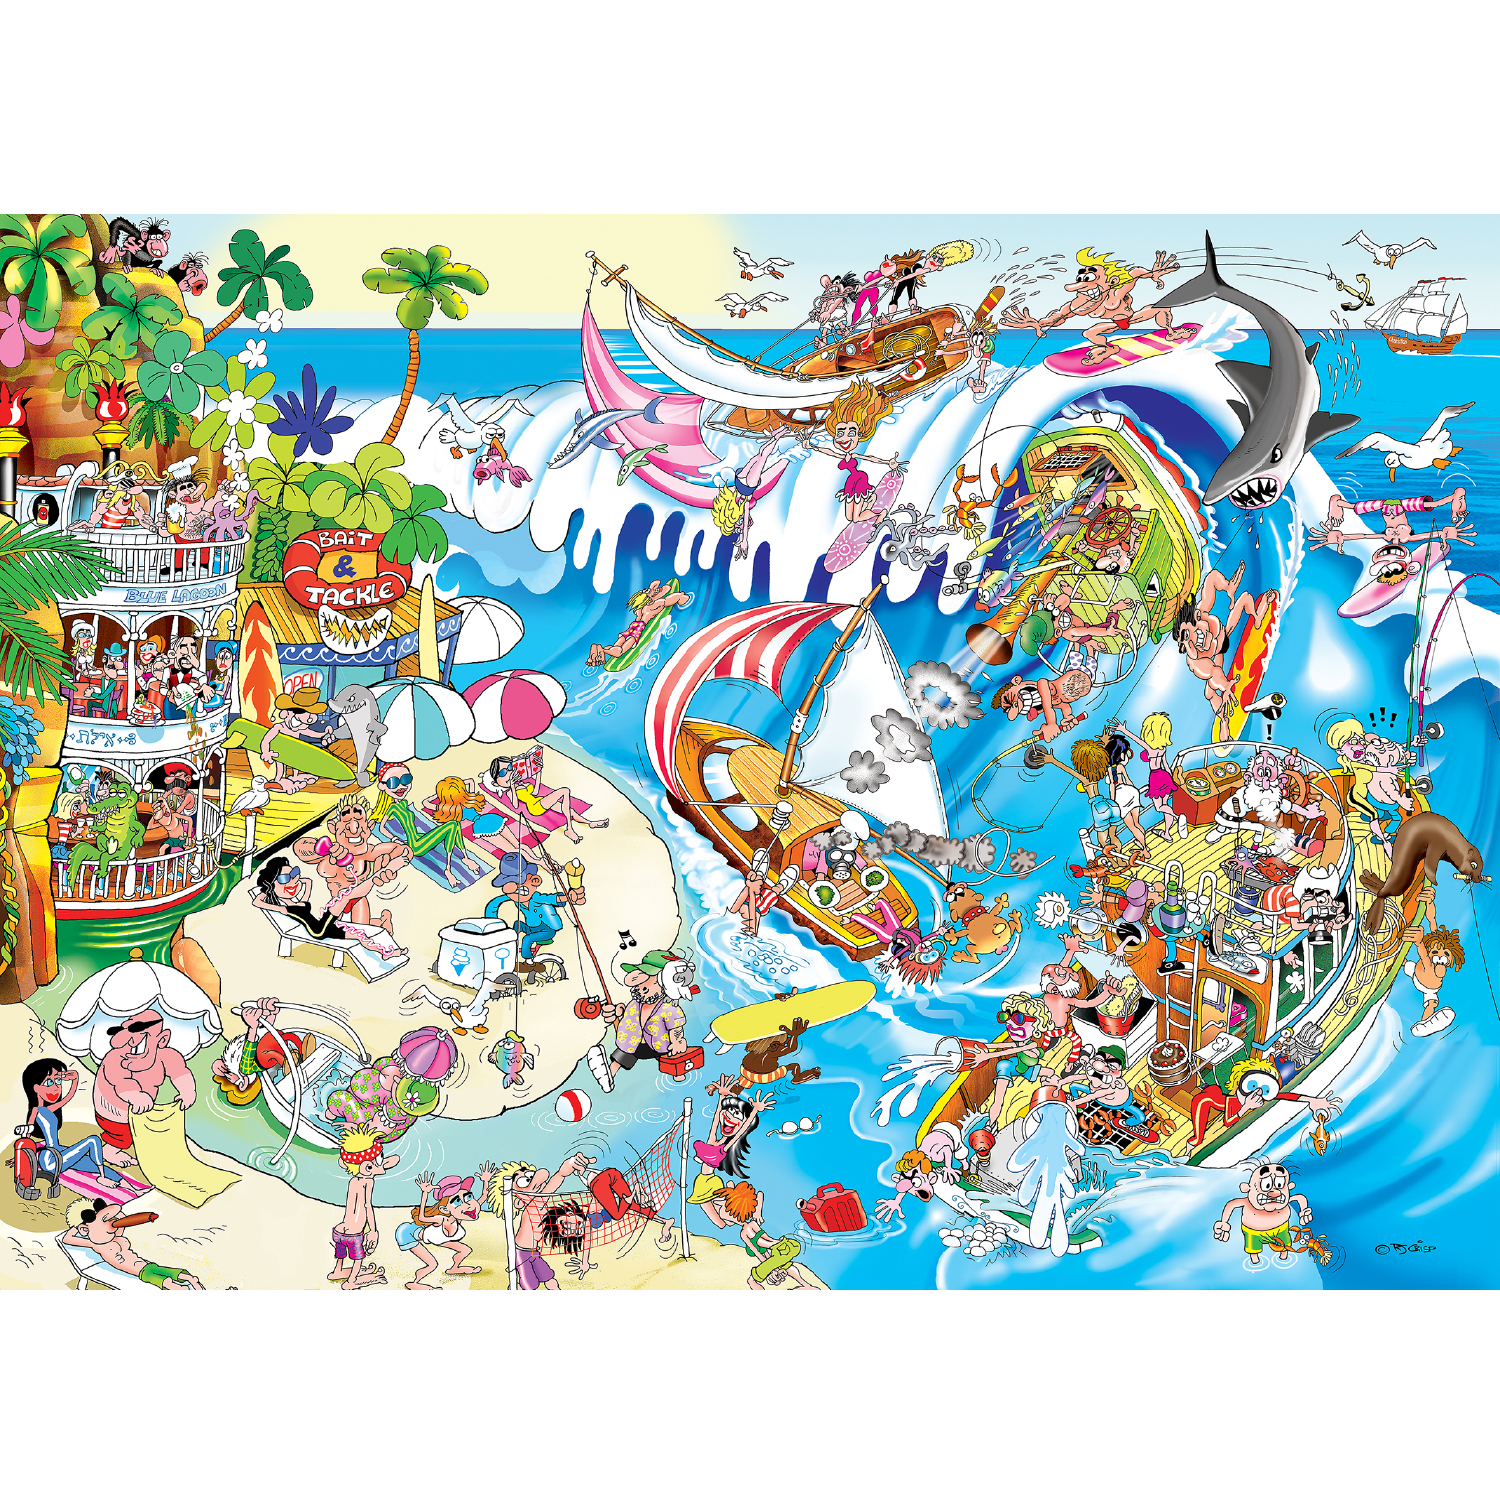 island paradise cartoon puzzle at the beach with many people